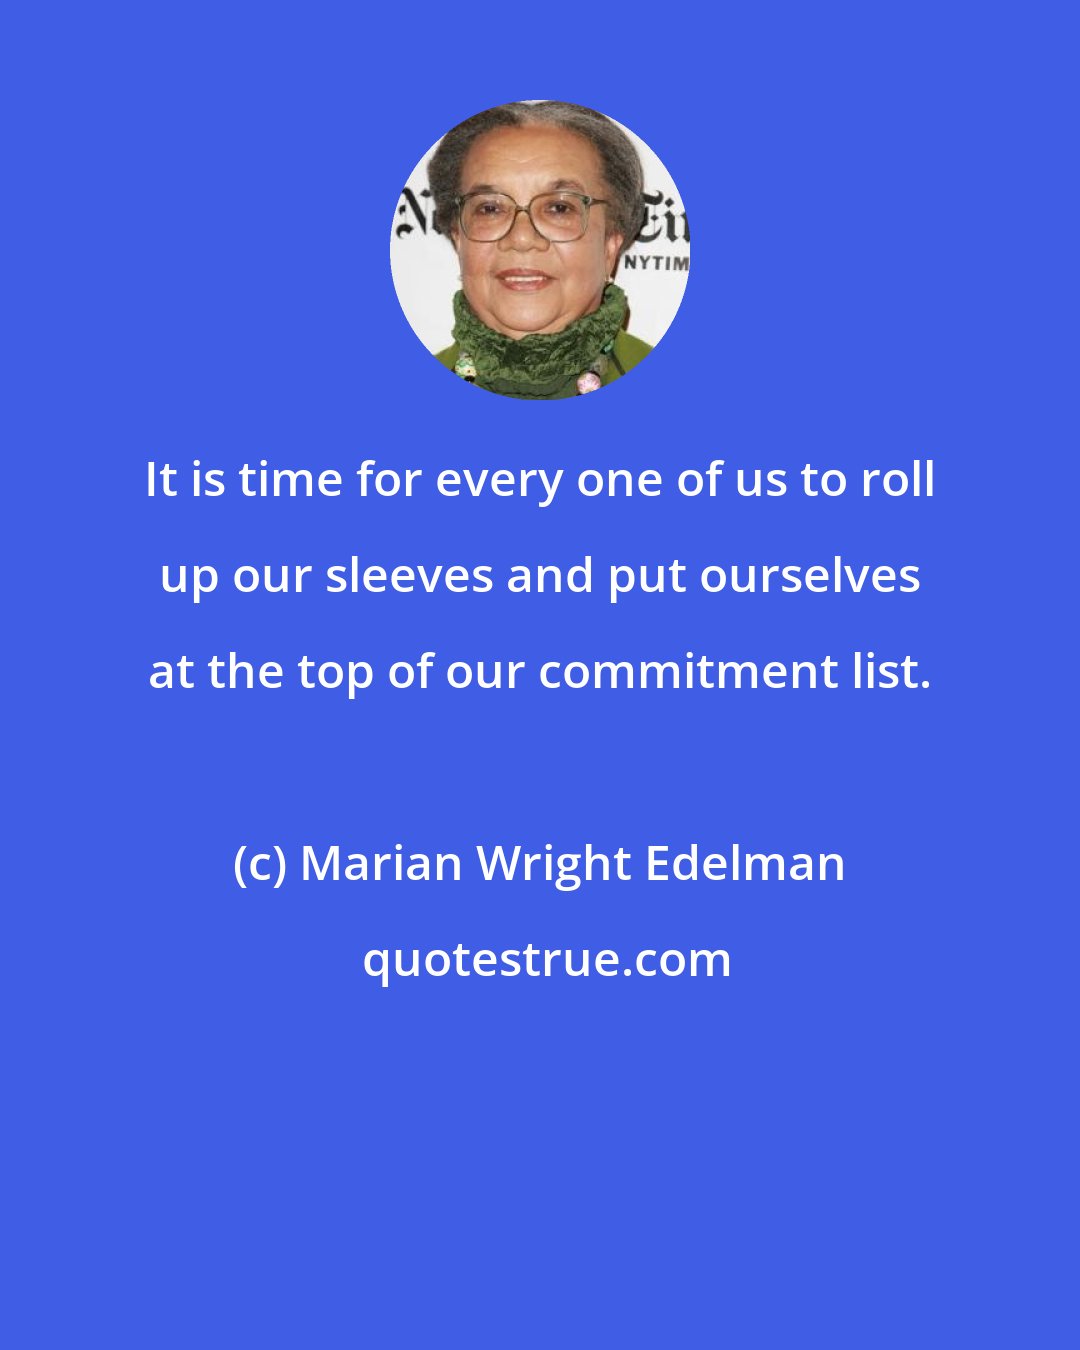 Marian Wright Edelman: It is time for every one of us to roll up our sleeves and put ourselves at the top of our commitment list.